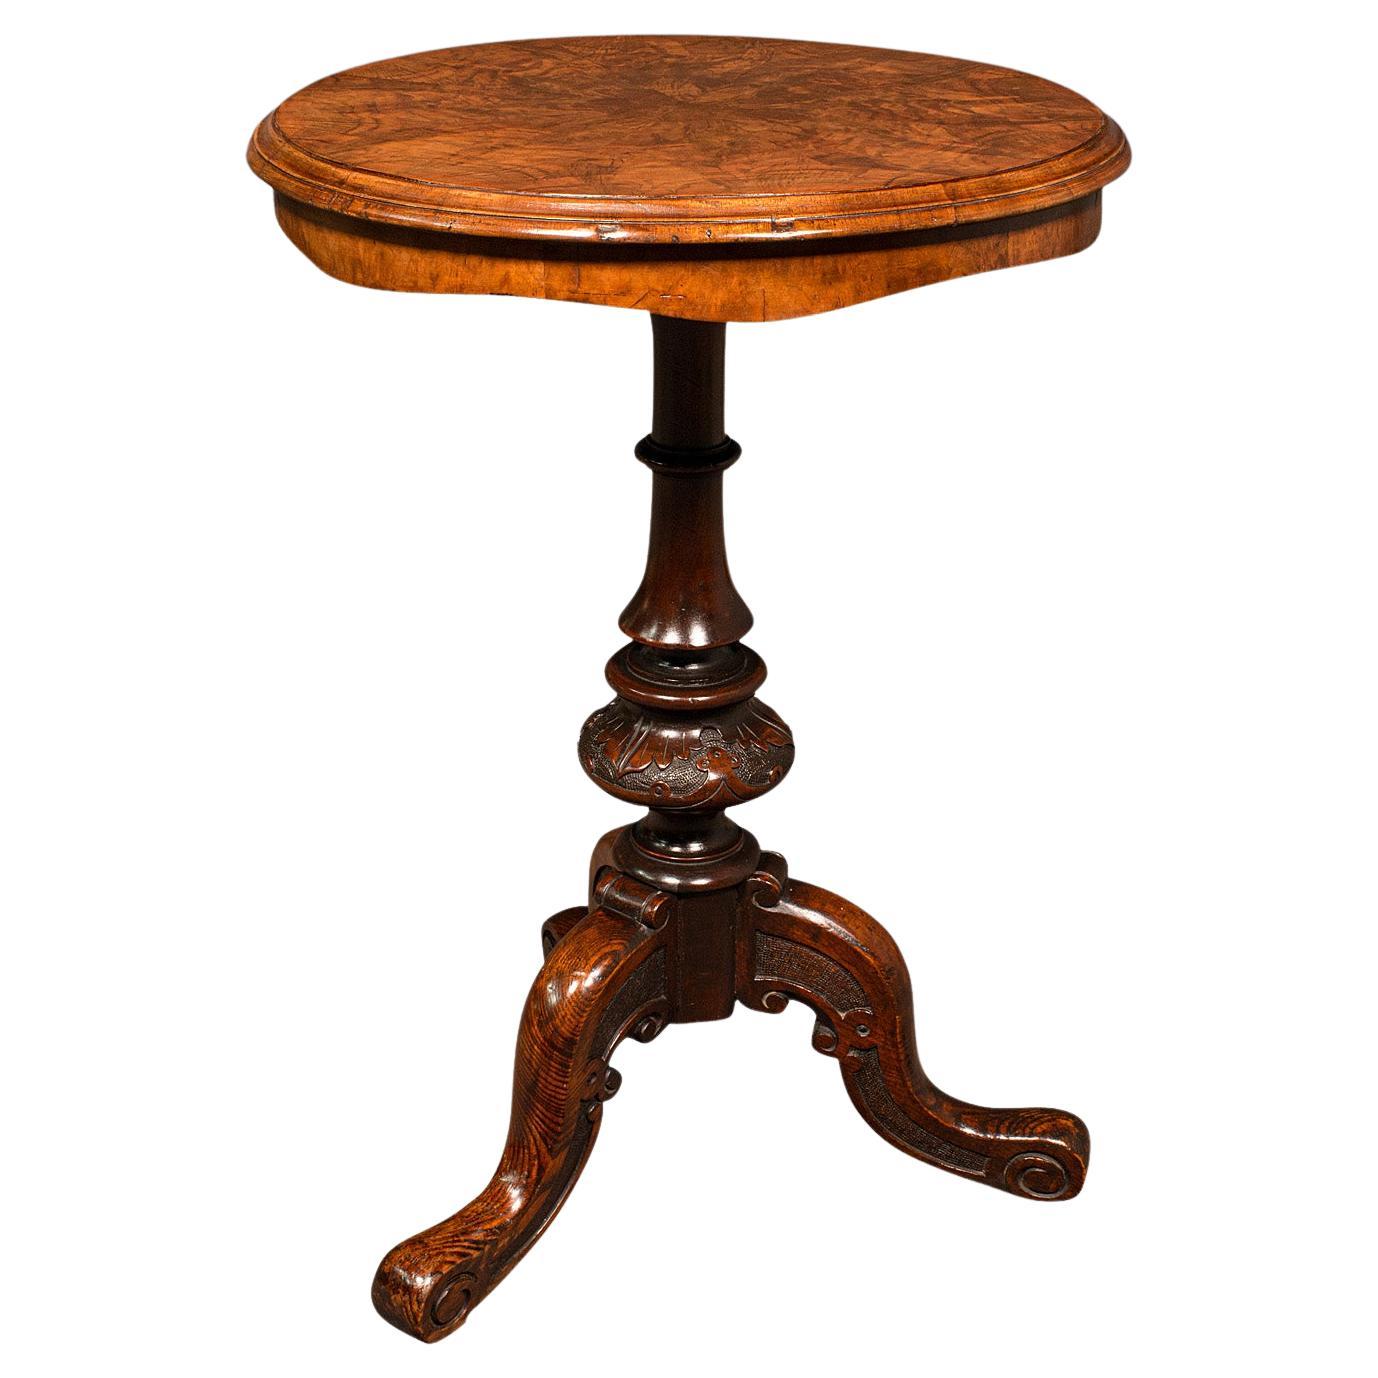 Antique Lamp Table, English Burr Walnut, Decorative, Occasional, Early Victorian For Sale